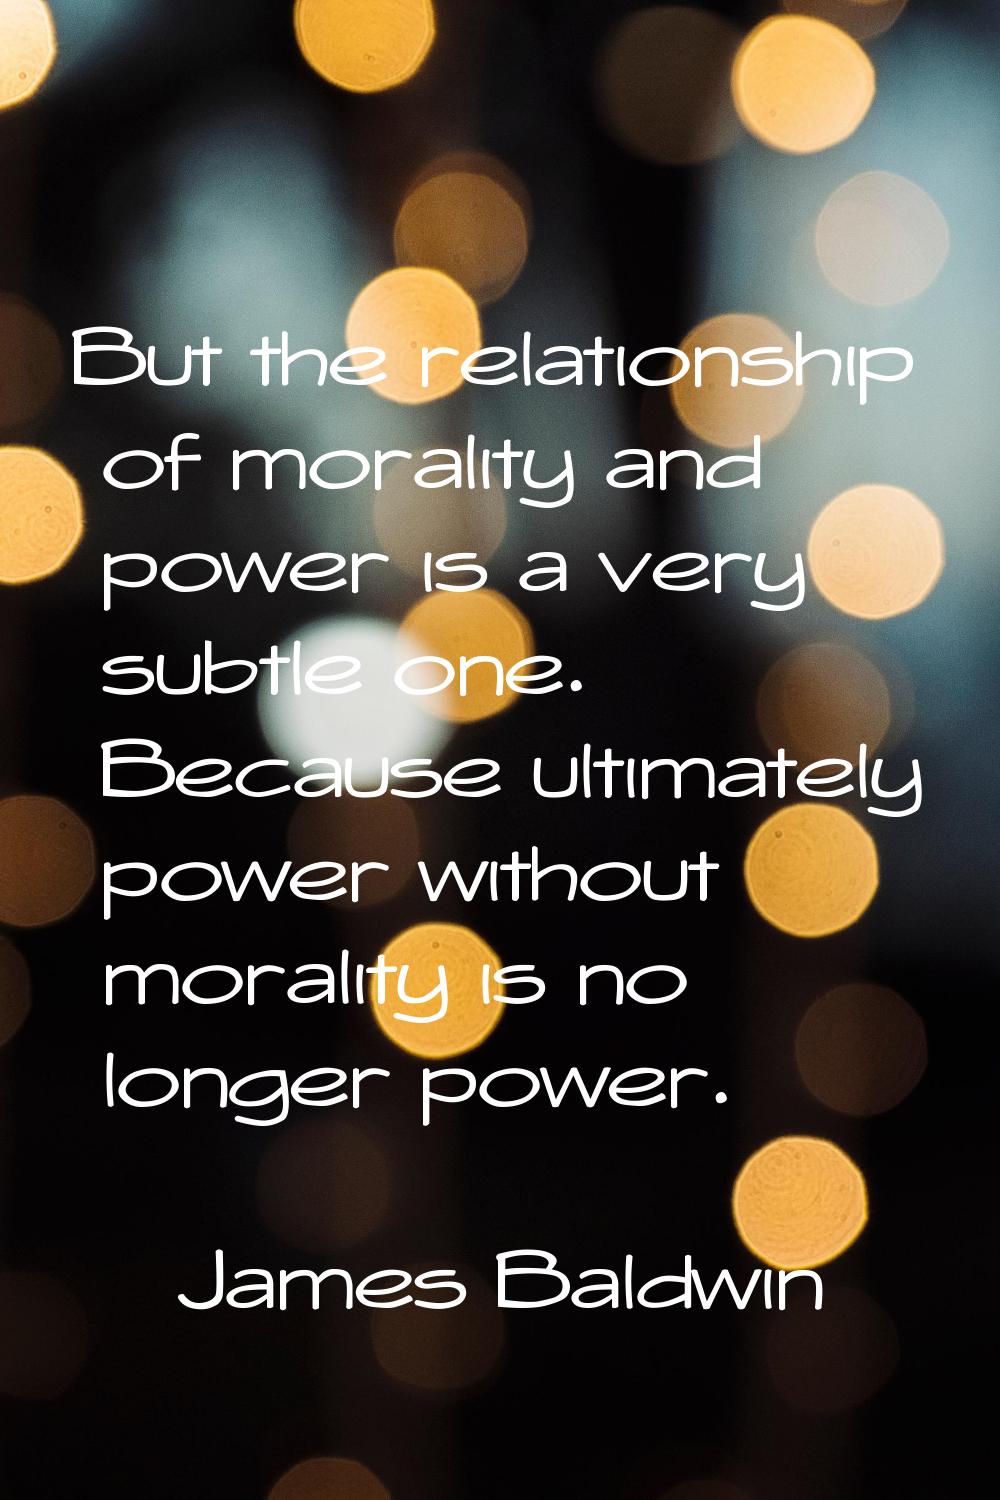 But the relationship of morality and power is a very subtle one. Because ultimately power without m